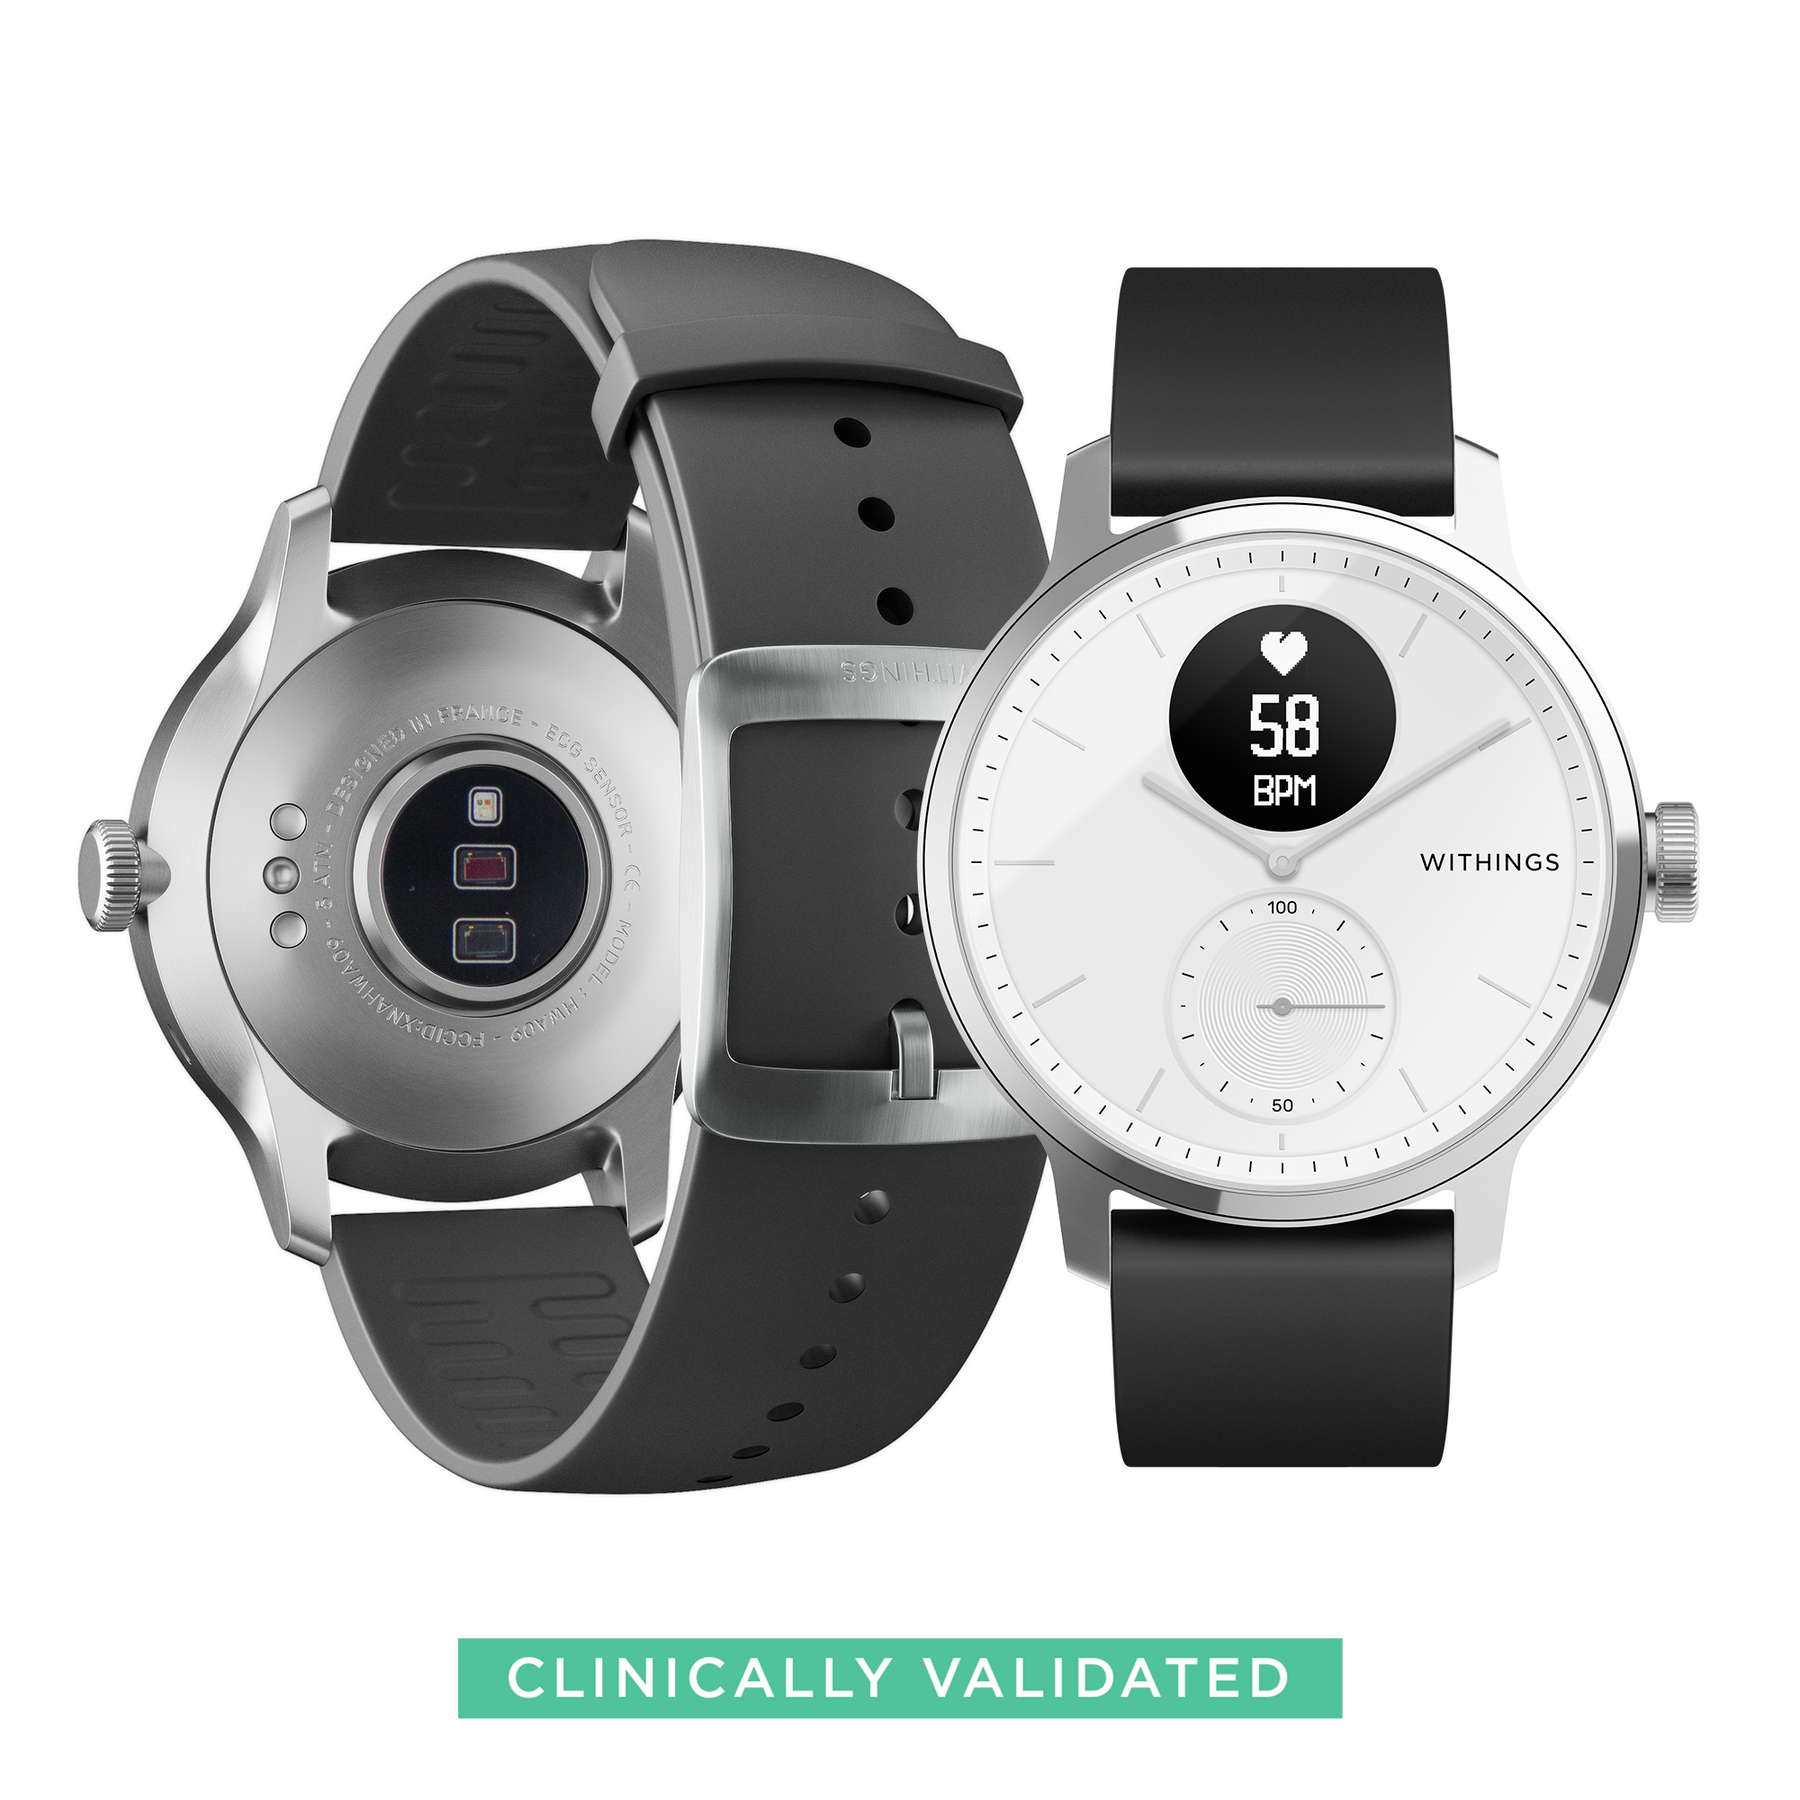 Withings ScanWatch 2 - Hybrid Smartwatch With ECG (38mm) White